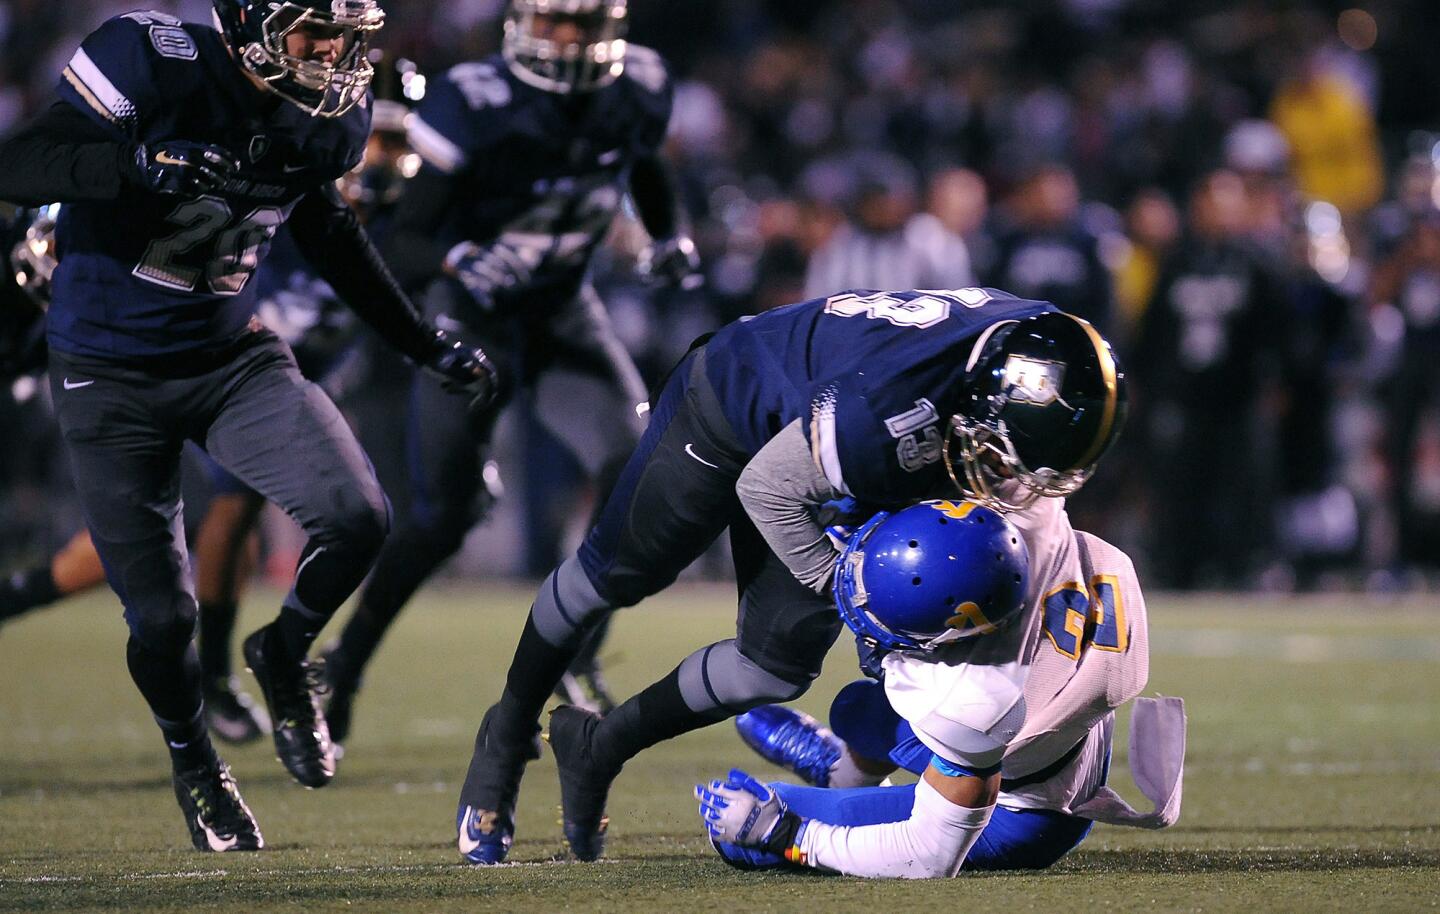 St. John Bosco’s Tyrel Thomas brings down Bishop Amat’s Trevon Sidney during a Pac-5 Division football semifinal on Friday night at Cerritos College.